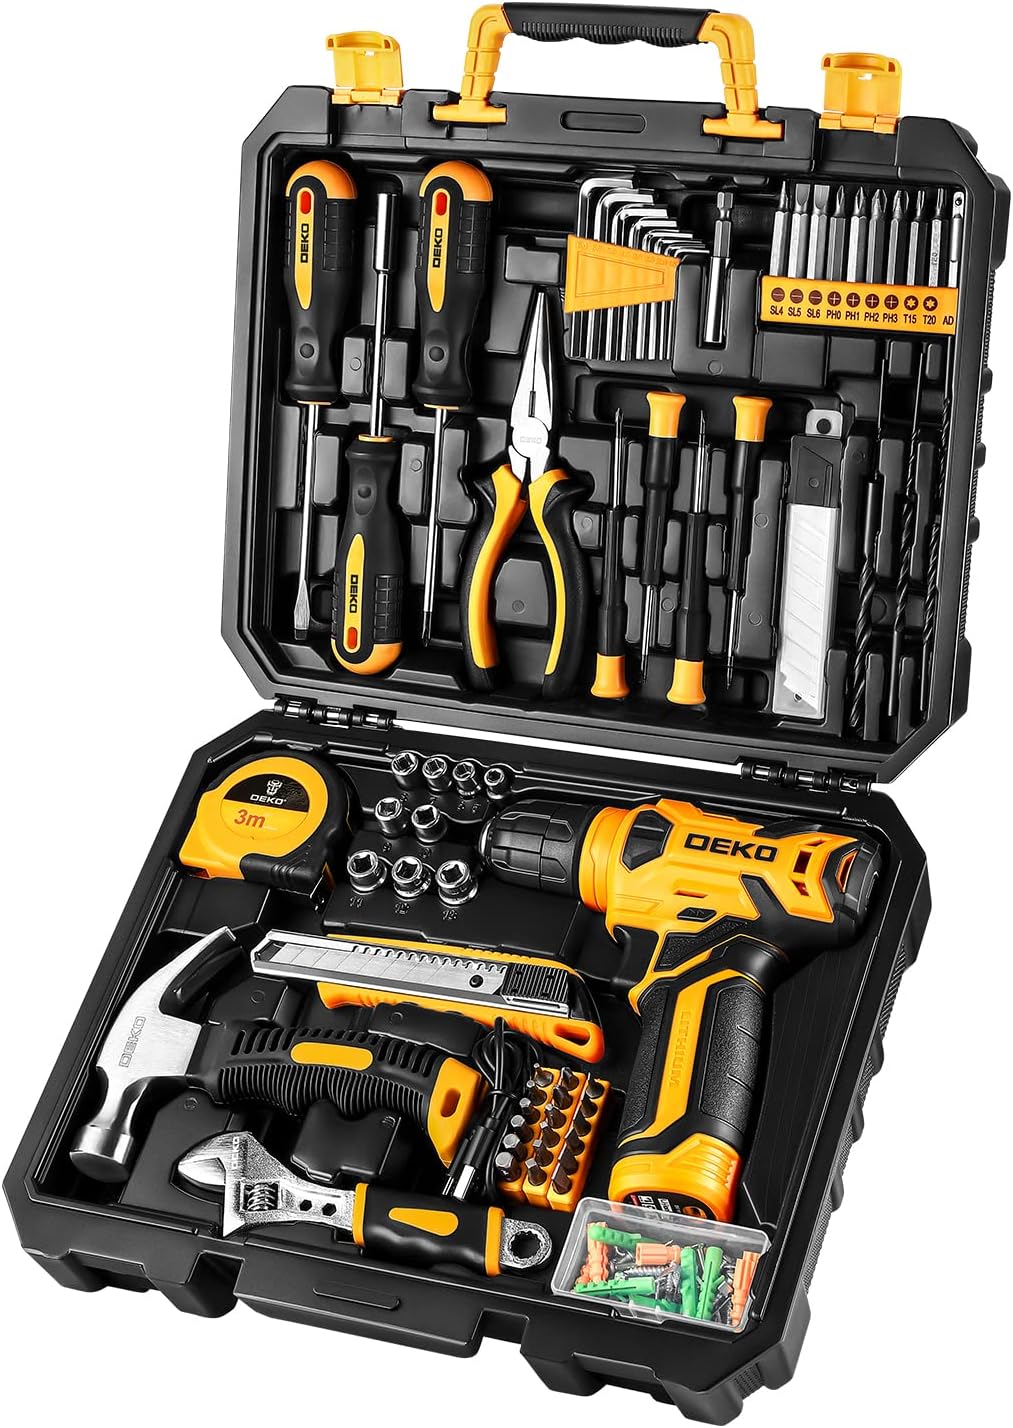 Dekopro 126 Piece Power Tool Combo Kits With 8V Cordless Drill Review